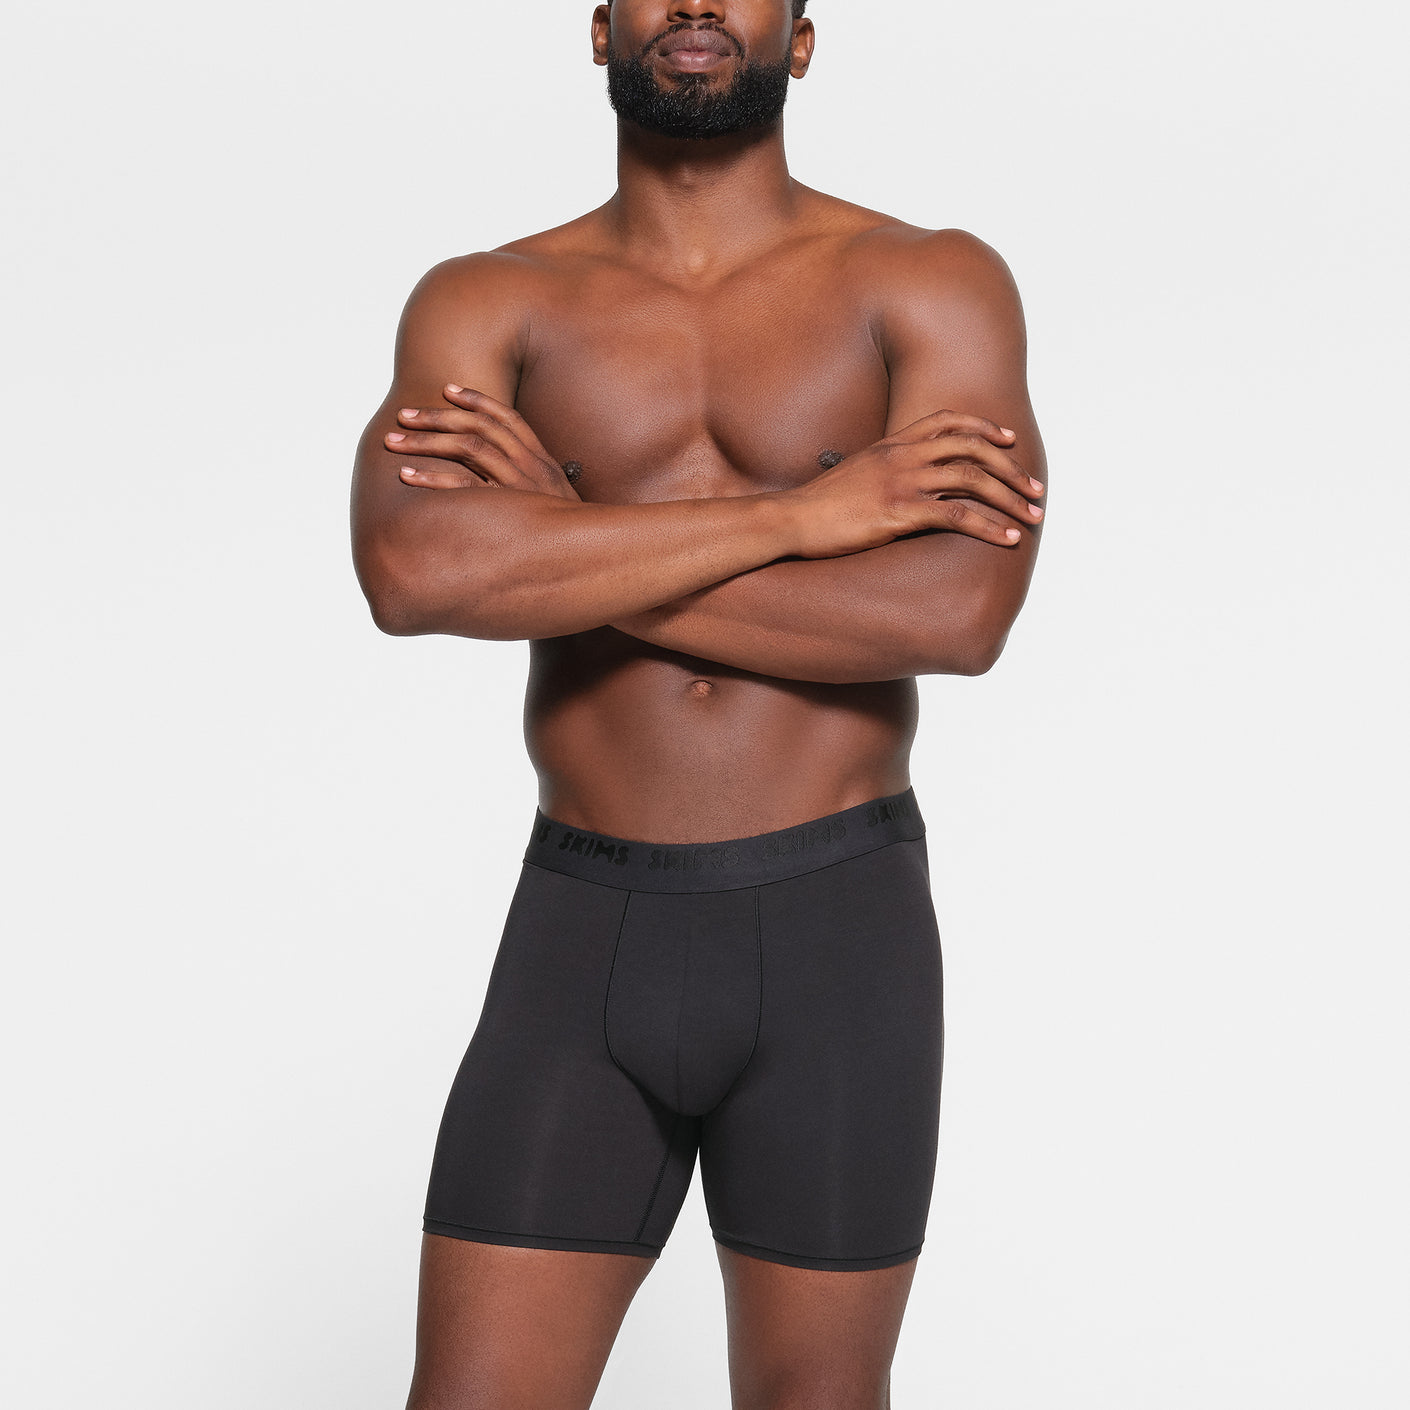 skims Men's Try on in the Cotton Briefs in Mutli color pack, on a size 3x  body.